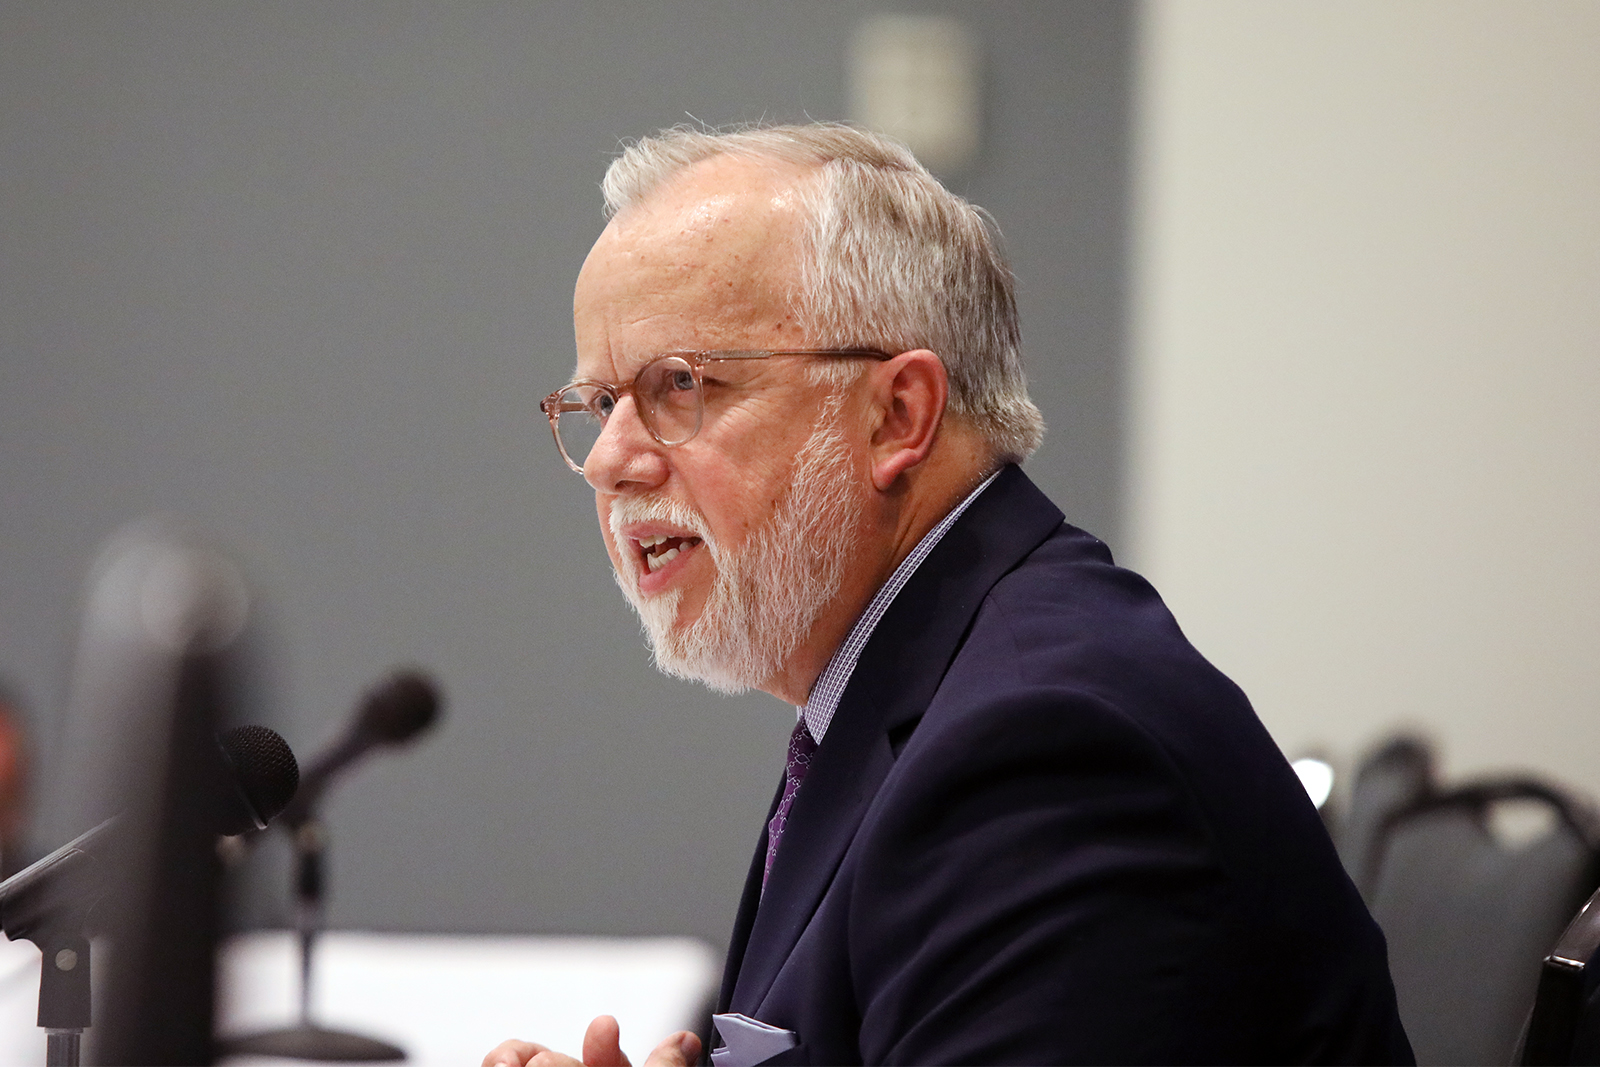 The Rev. Ed Litton speaks during a news conference following his election as the next president of the Southern Baptist Convention, Tuesday, June 15, 2021, in Nashville. RNS photo by Kit Doyle